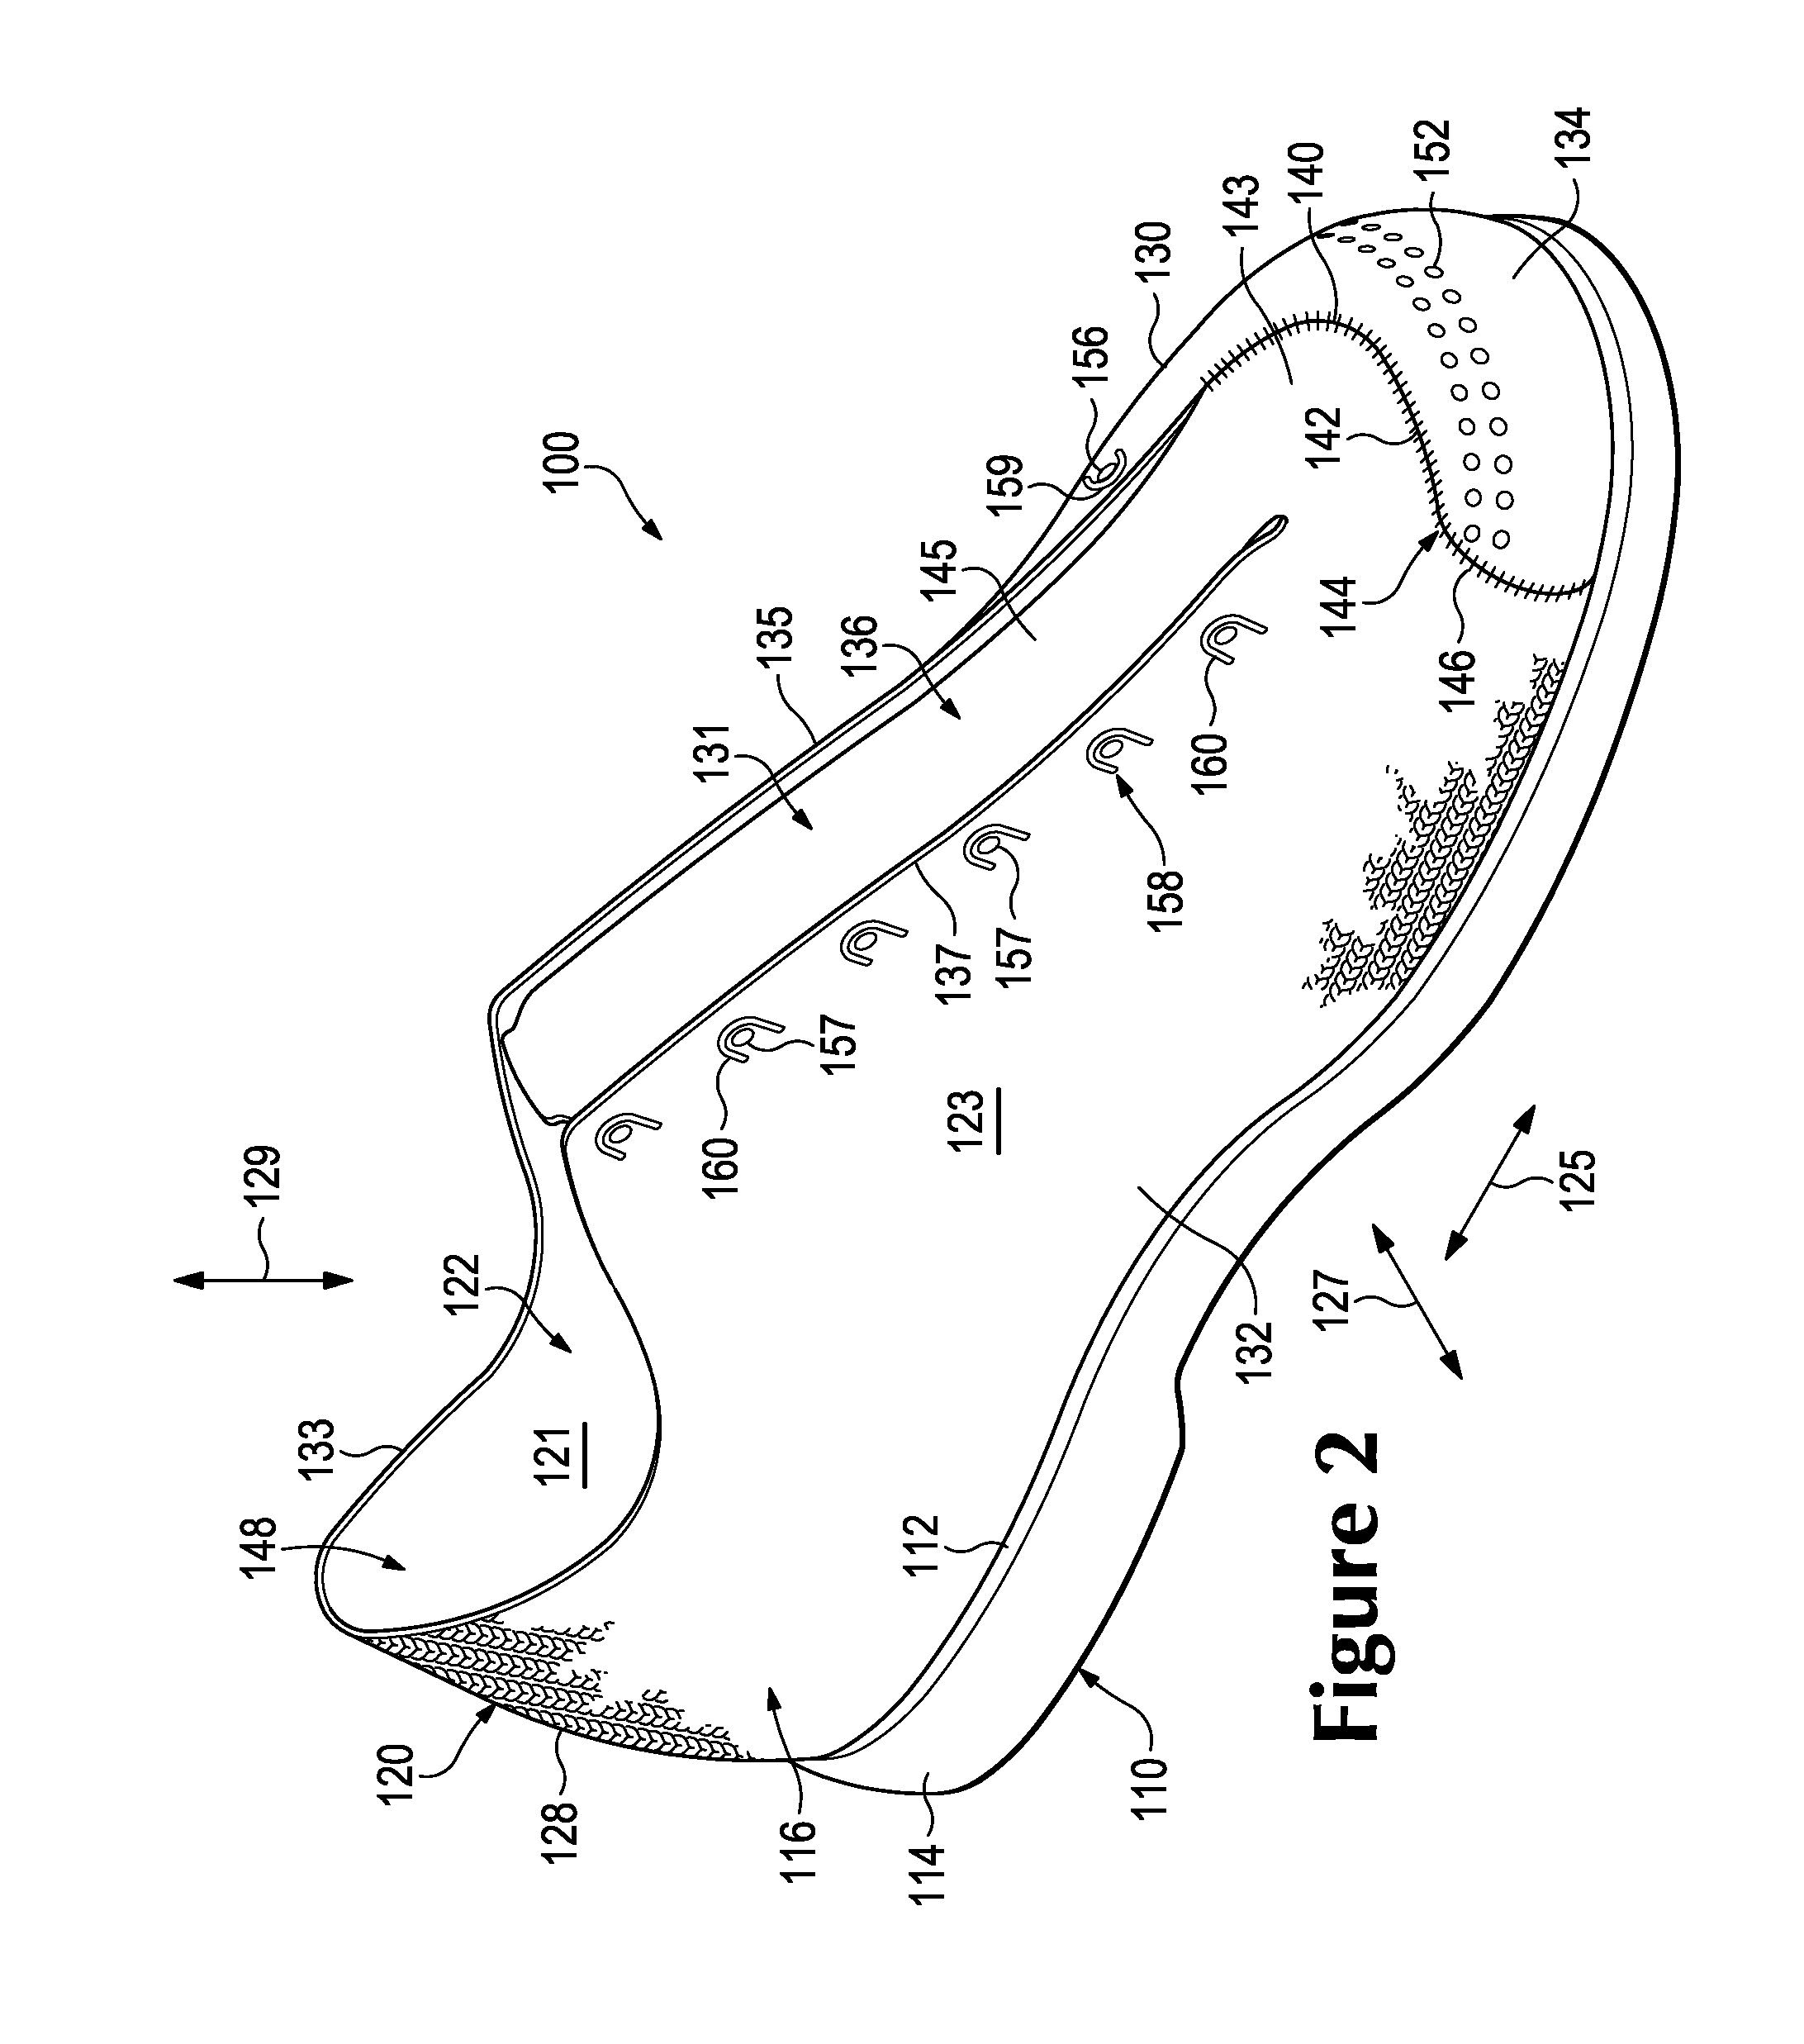 Article Of Footwear Incorporating A Knitted Component With Integrally Knit Contoured Portion